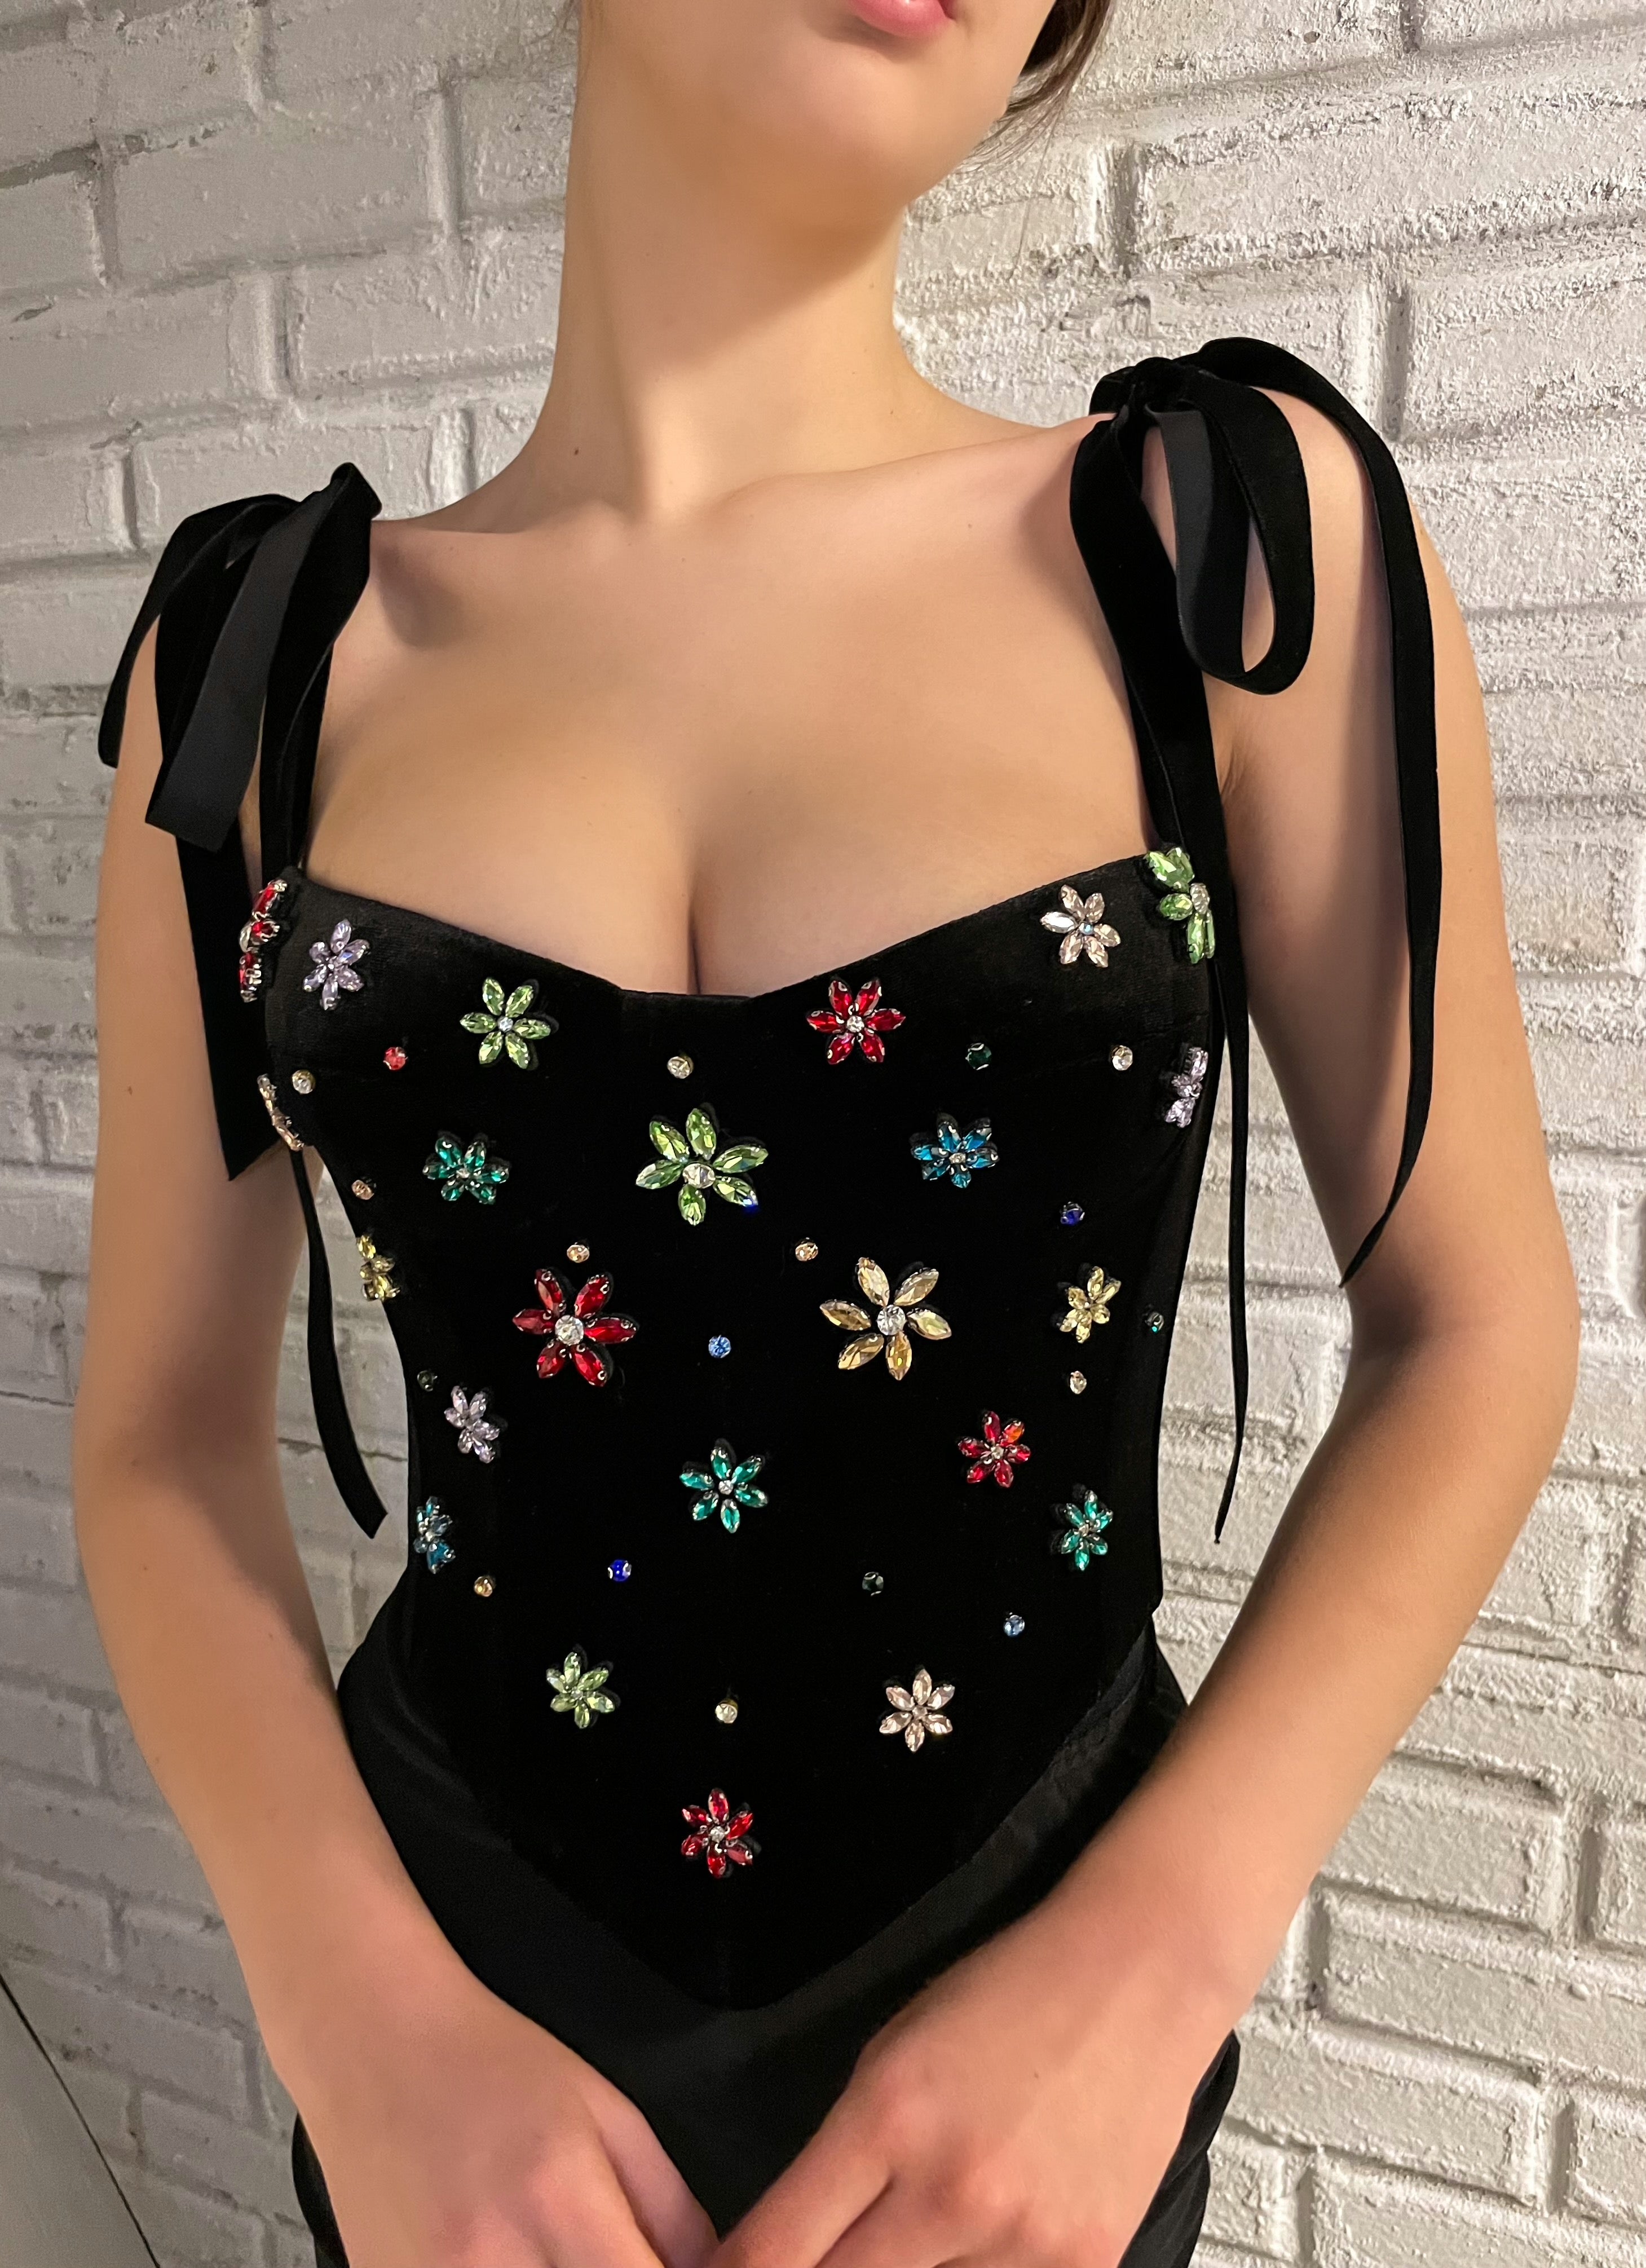 Black corset with bow straps and embroidery